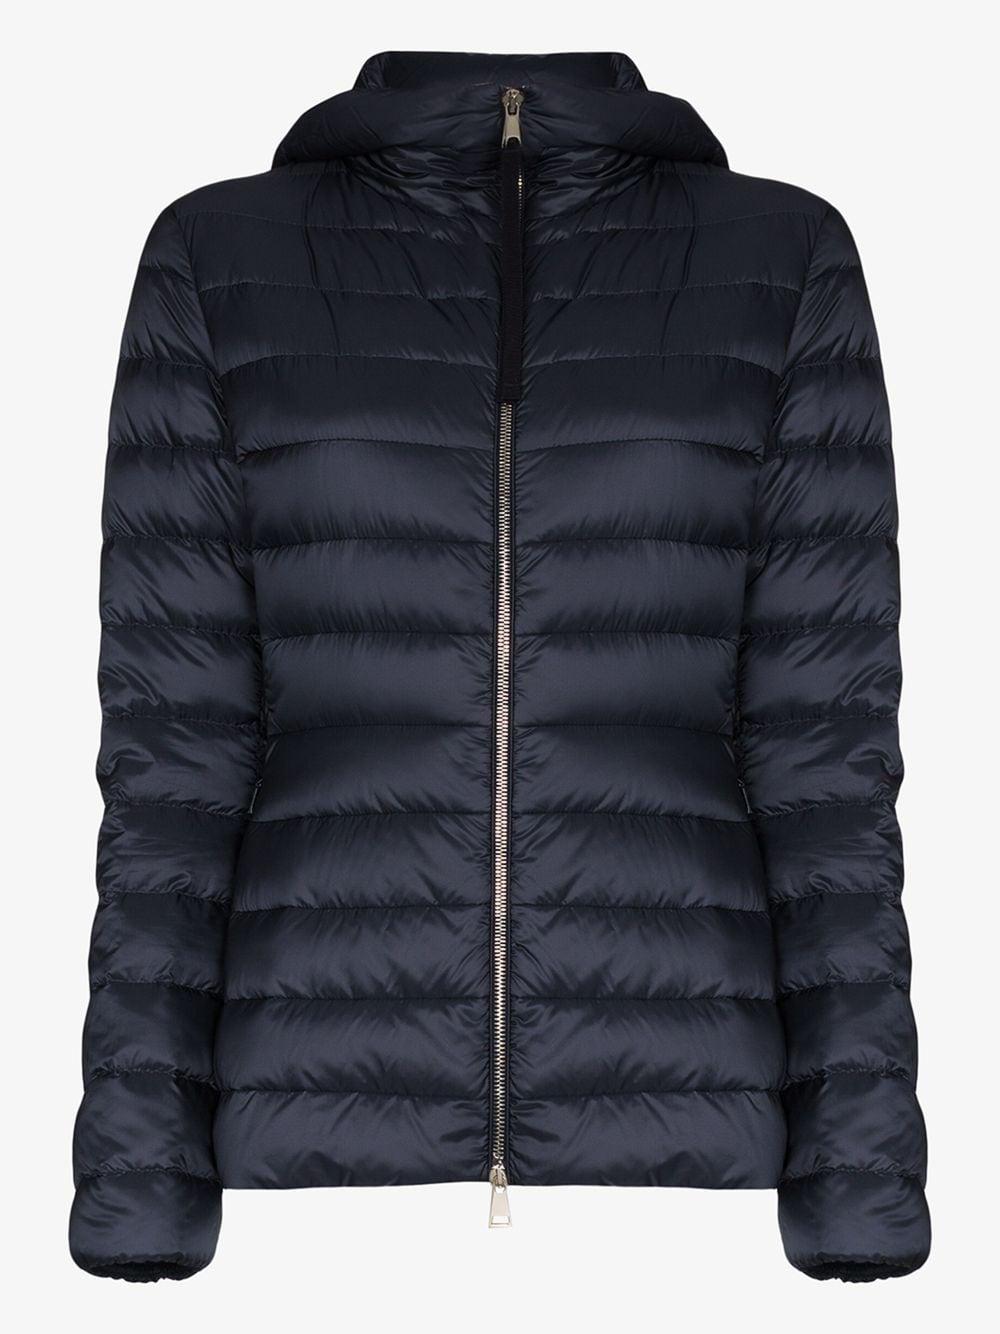 Moncler Quilted Amethyst Jacket in Black - Lyst